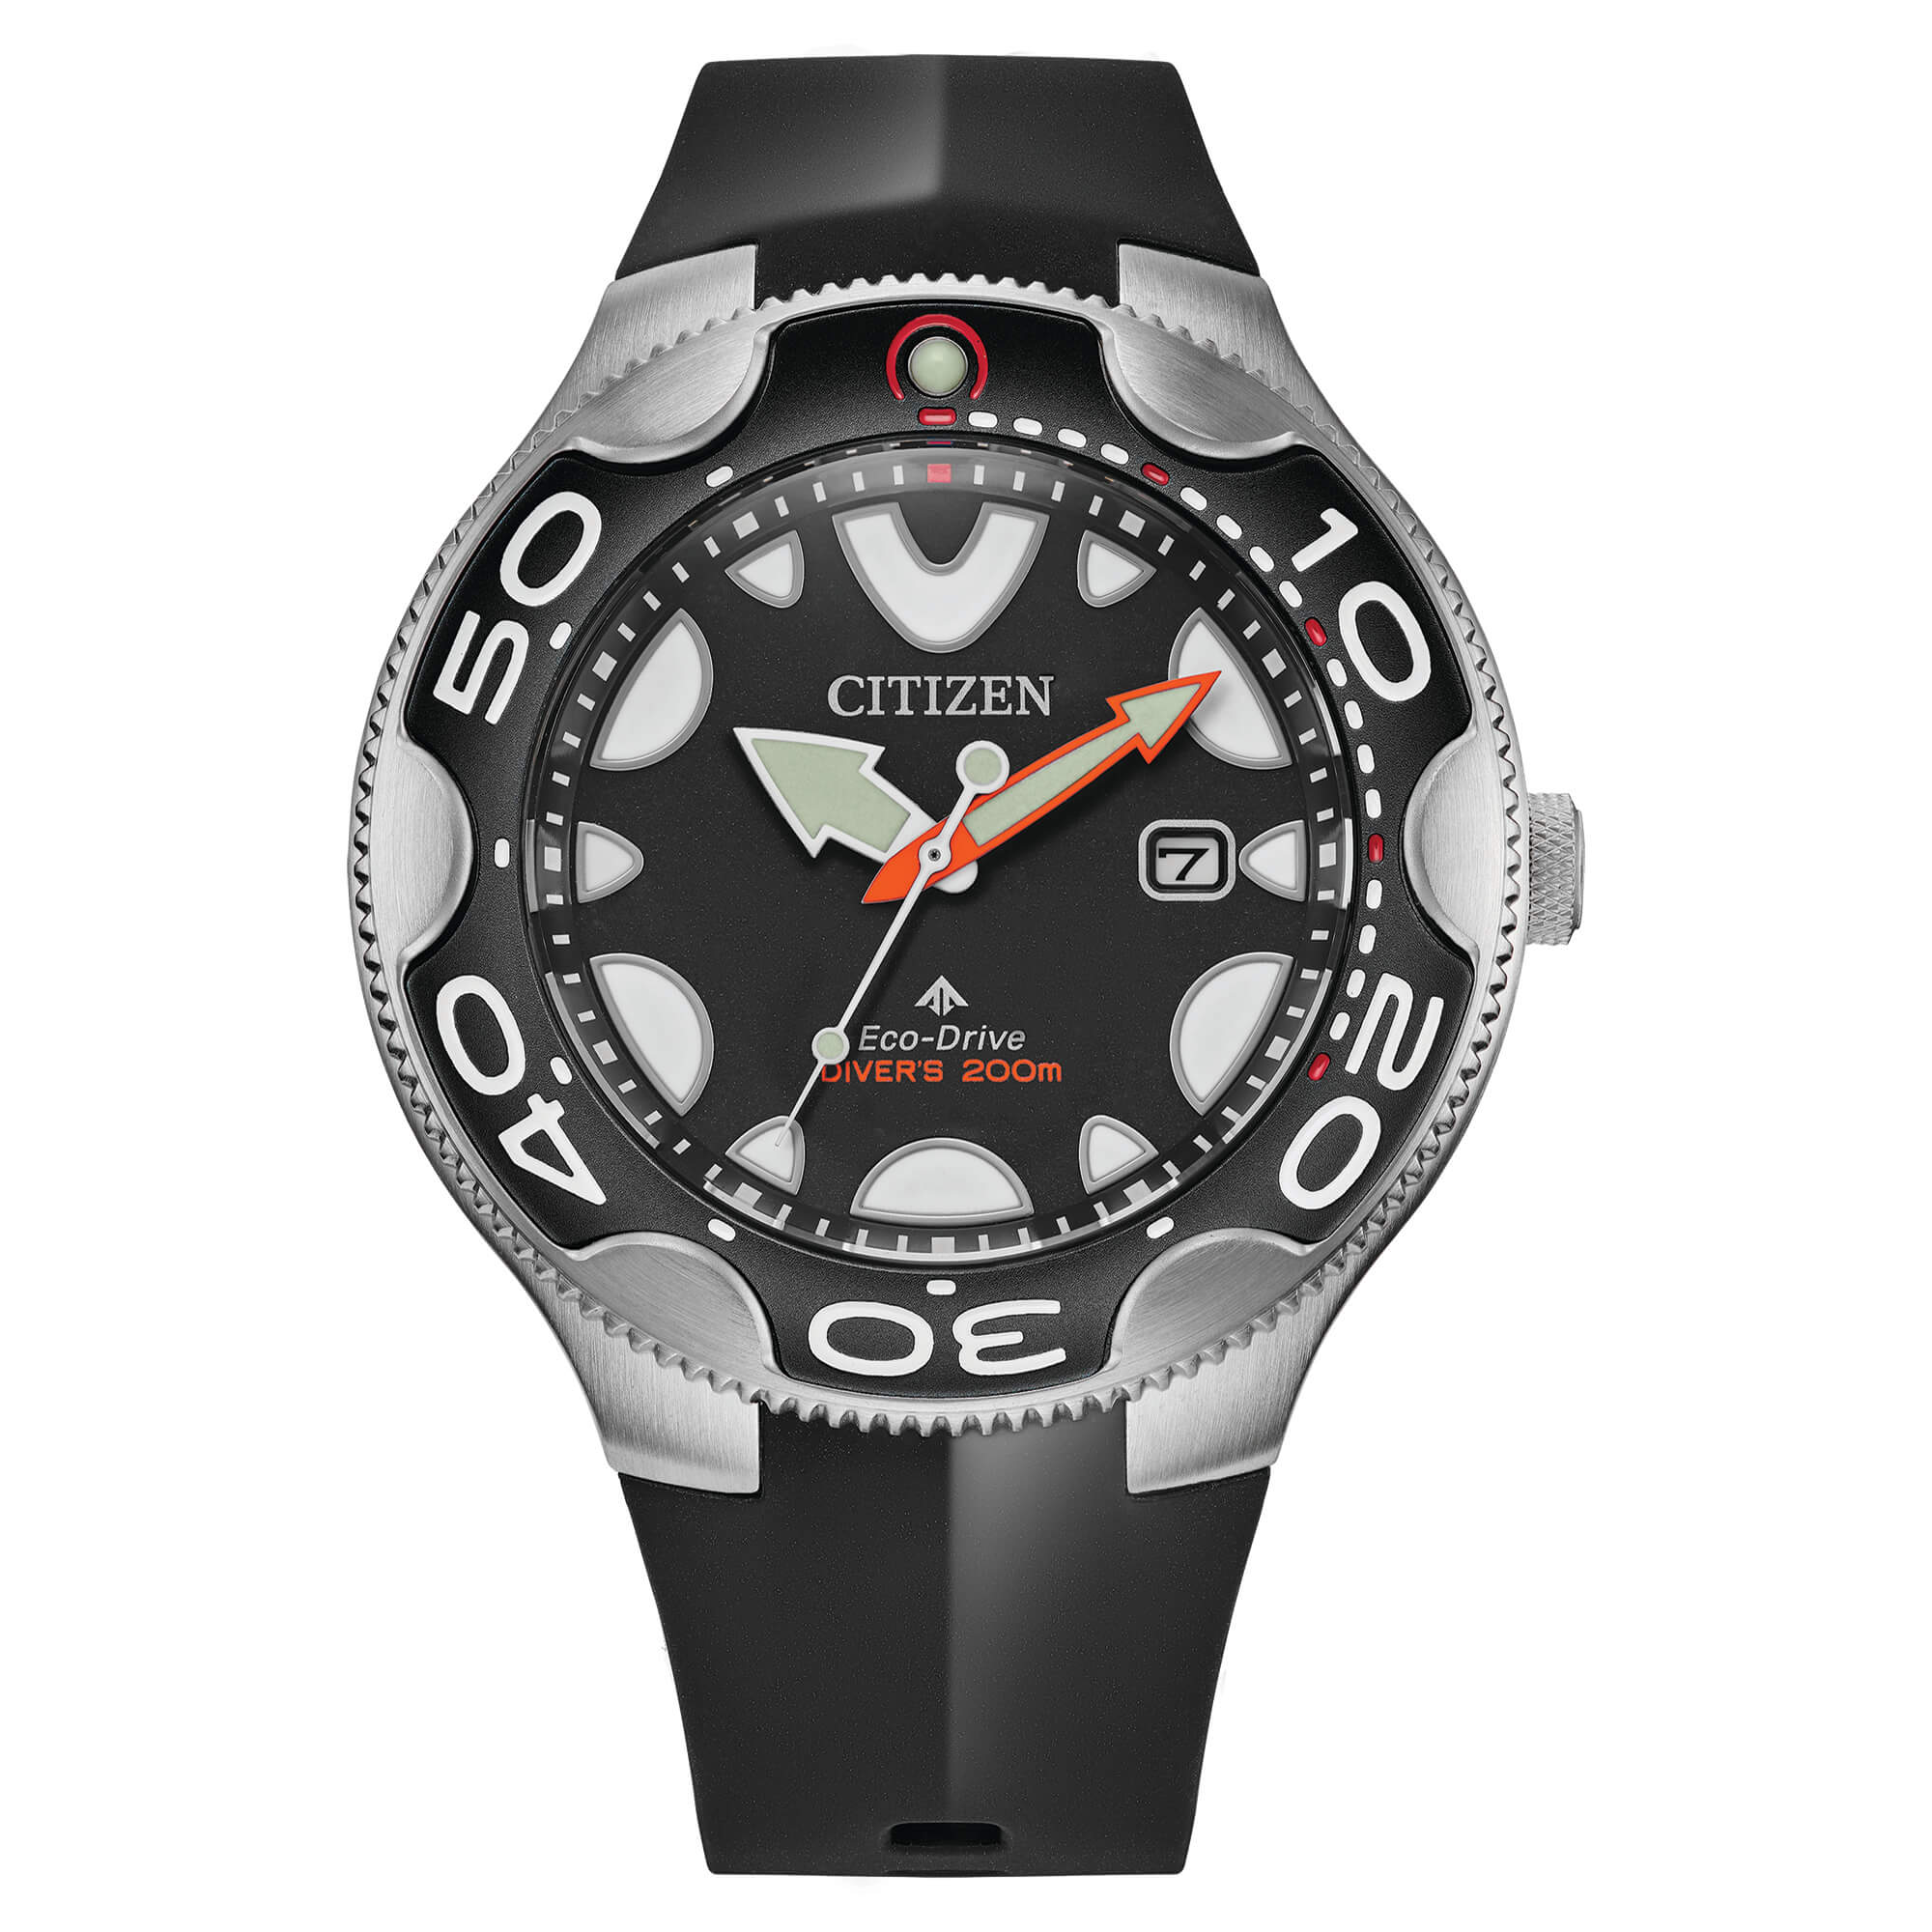 Diver's Eco Drive 200 m "Orca", OF Collection, 46mm - BN0230-04E